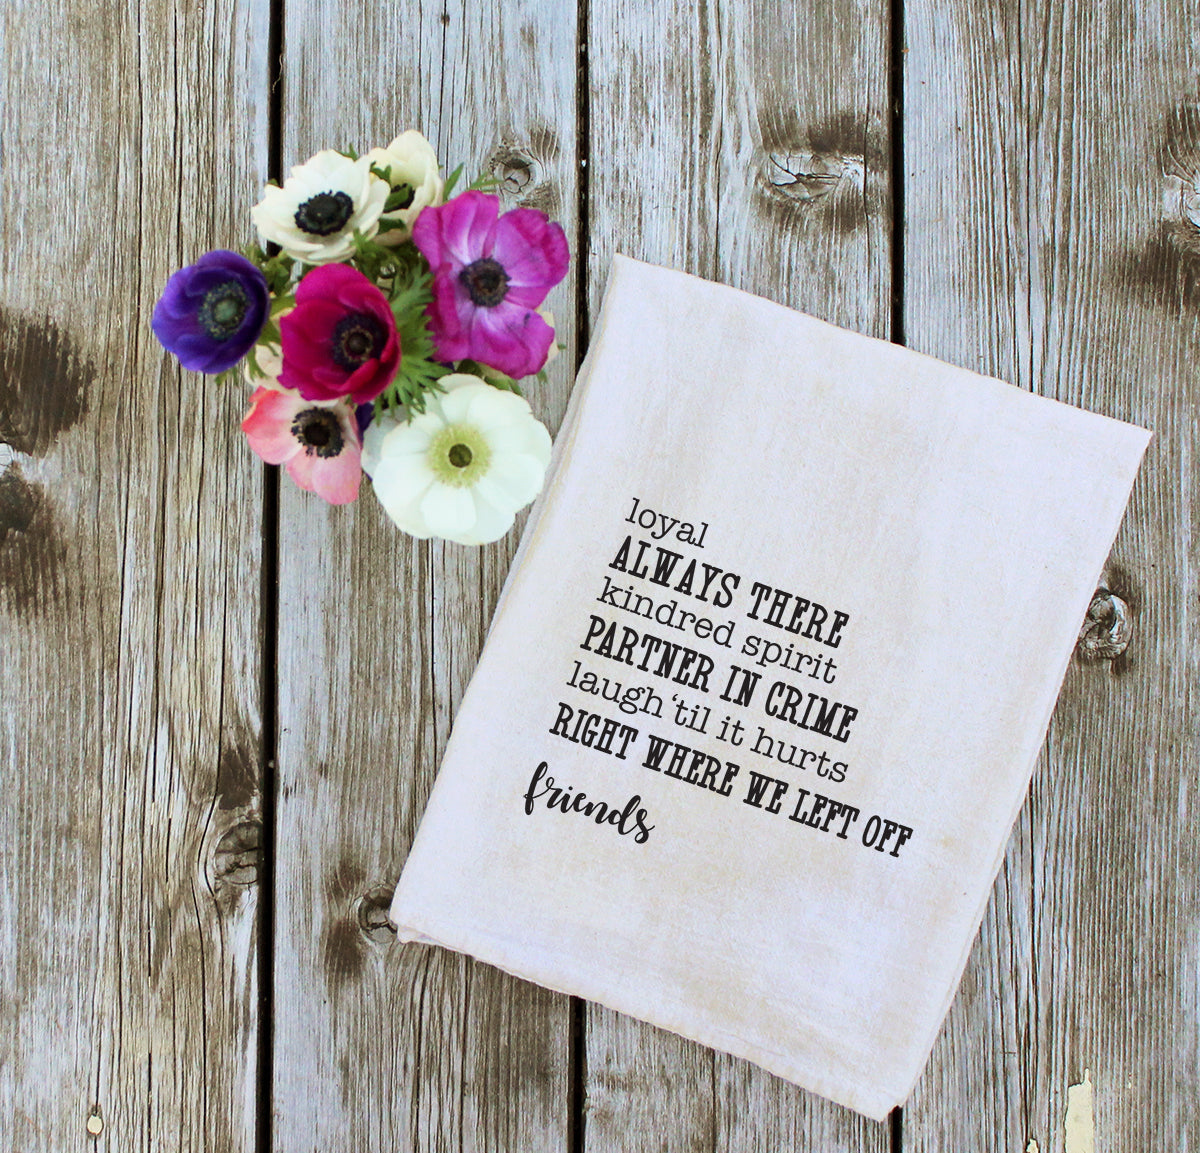 Loyal | Always there | partner in crime | Friends Favorite Things Kitchen Towel